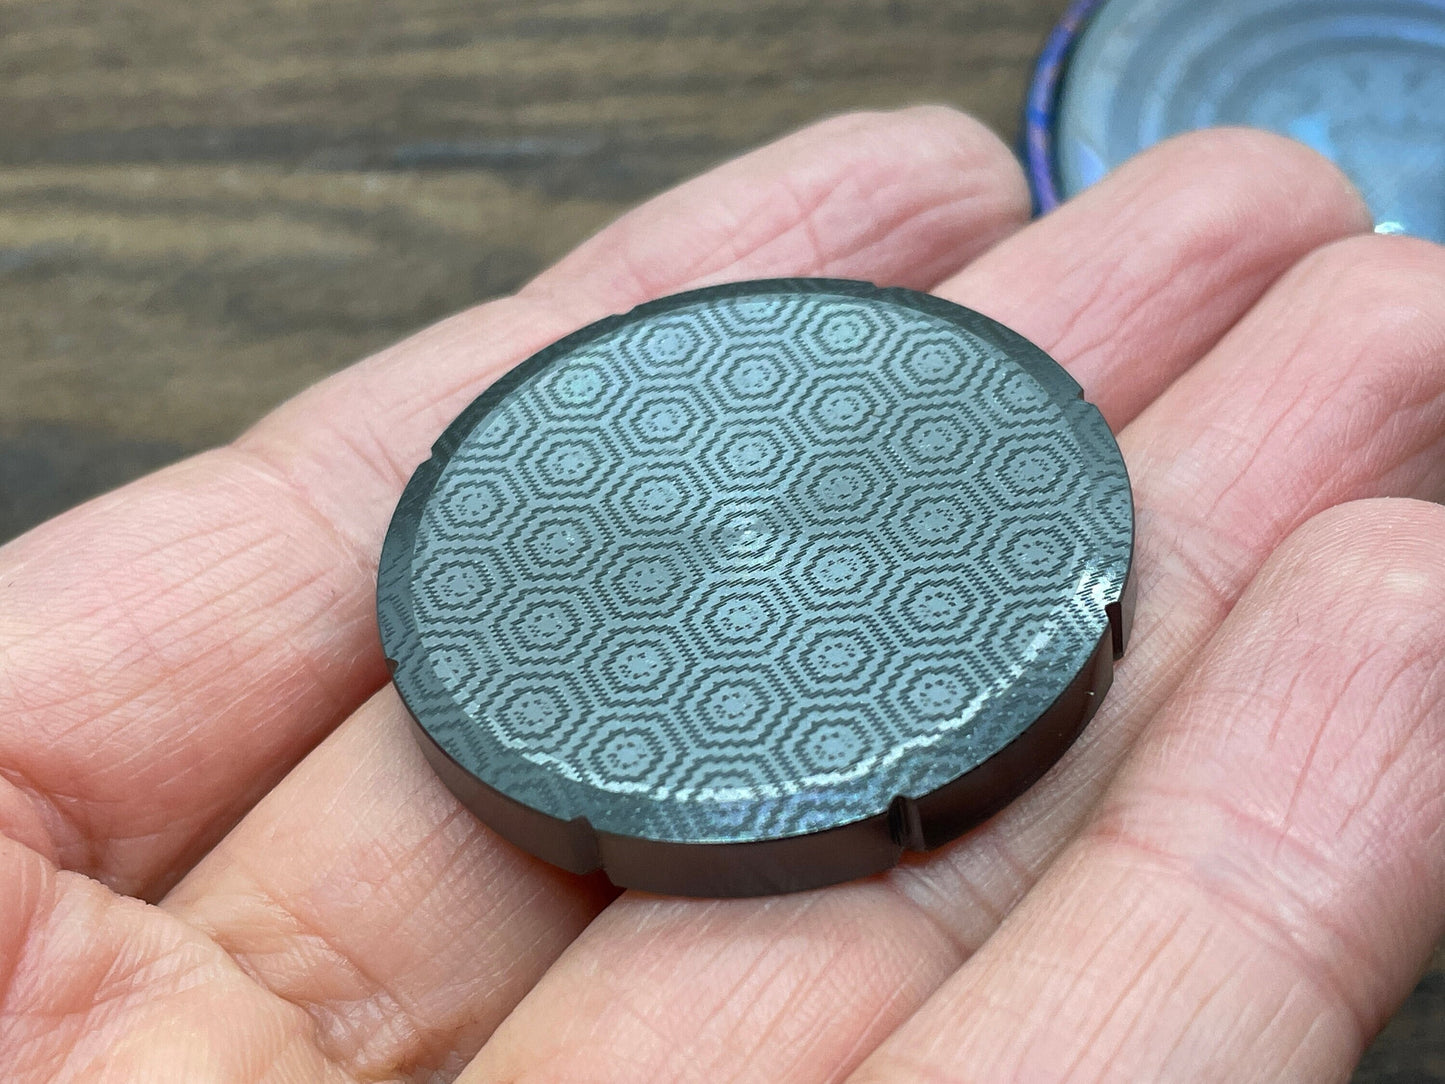 HONEYCOMB engraved Black Zirconium Spinning Worry Coin Spinning Top